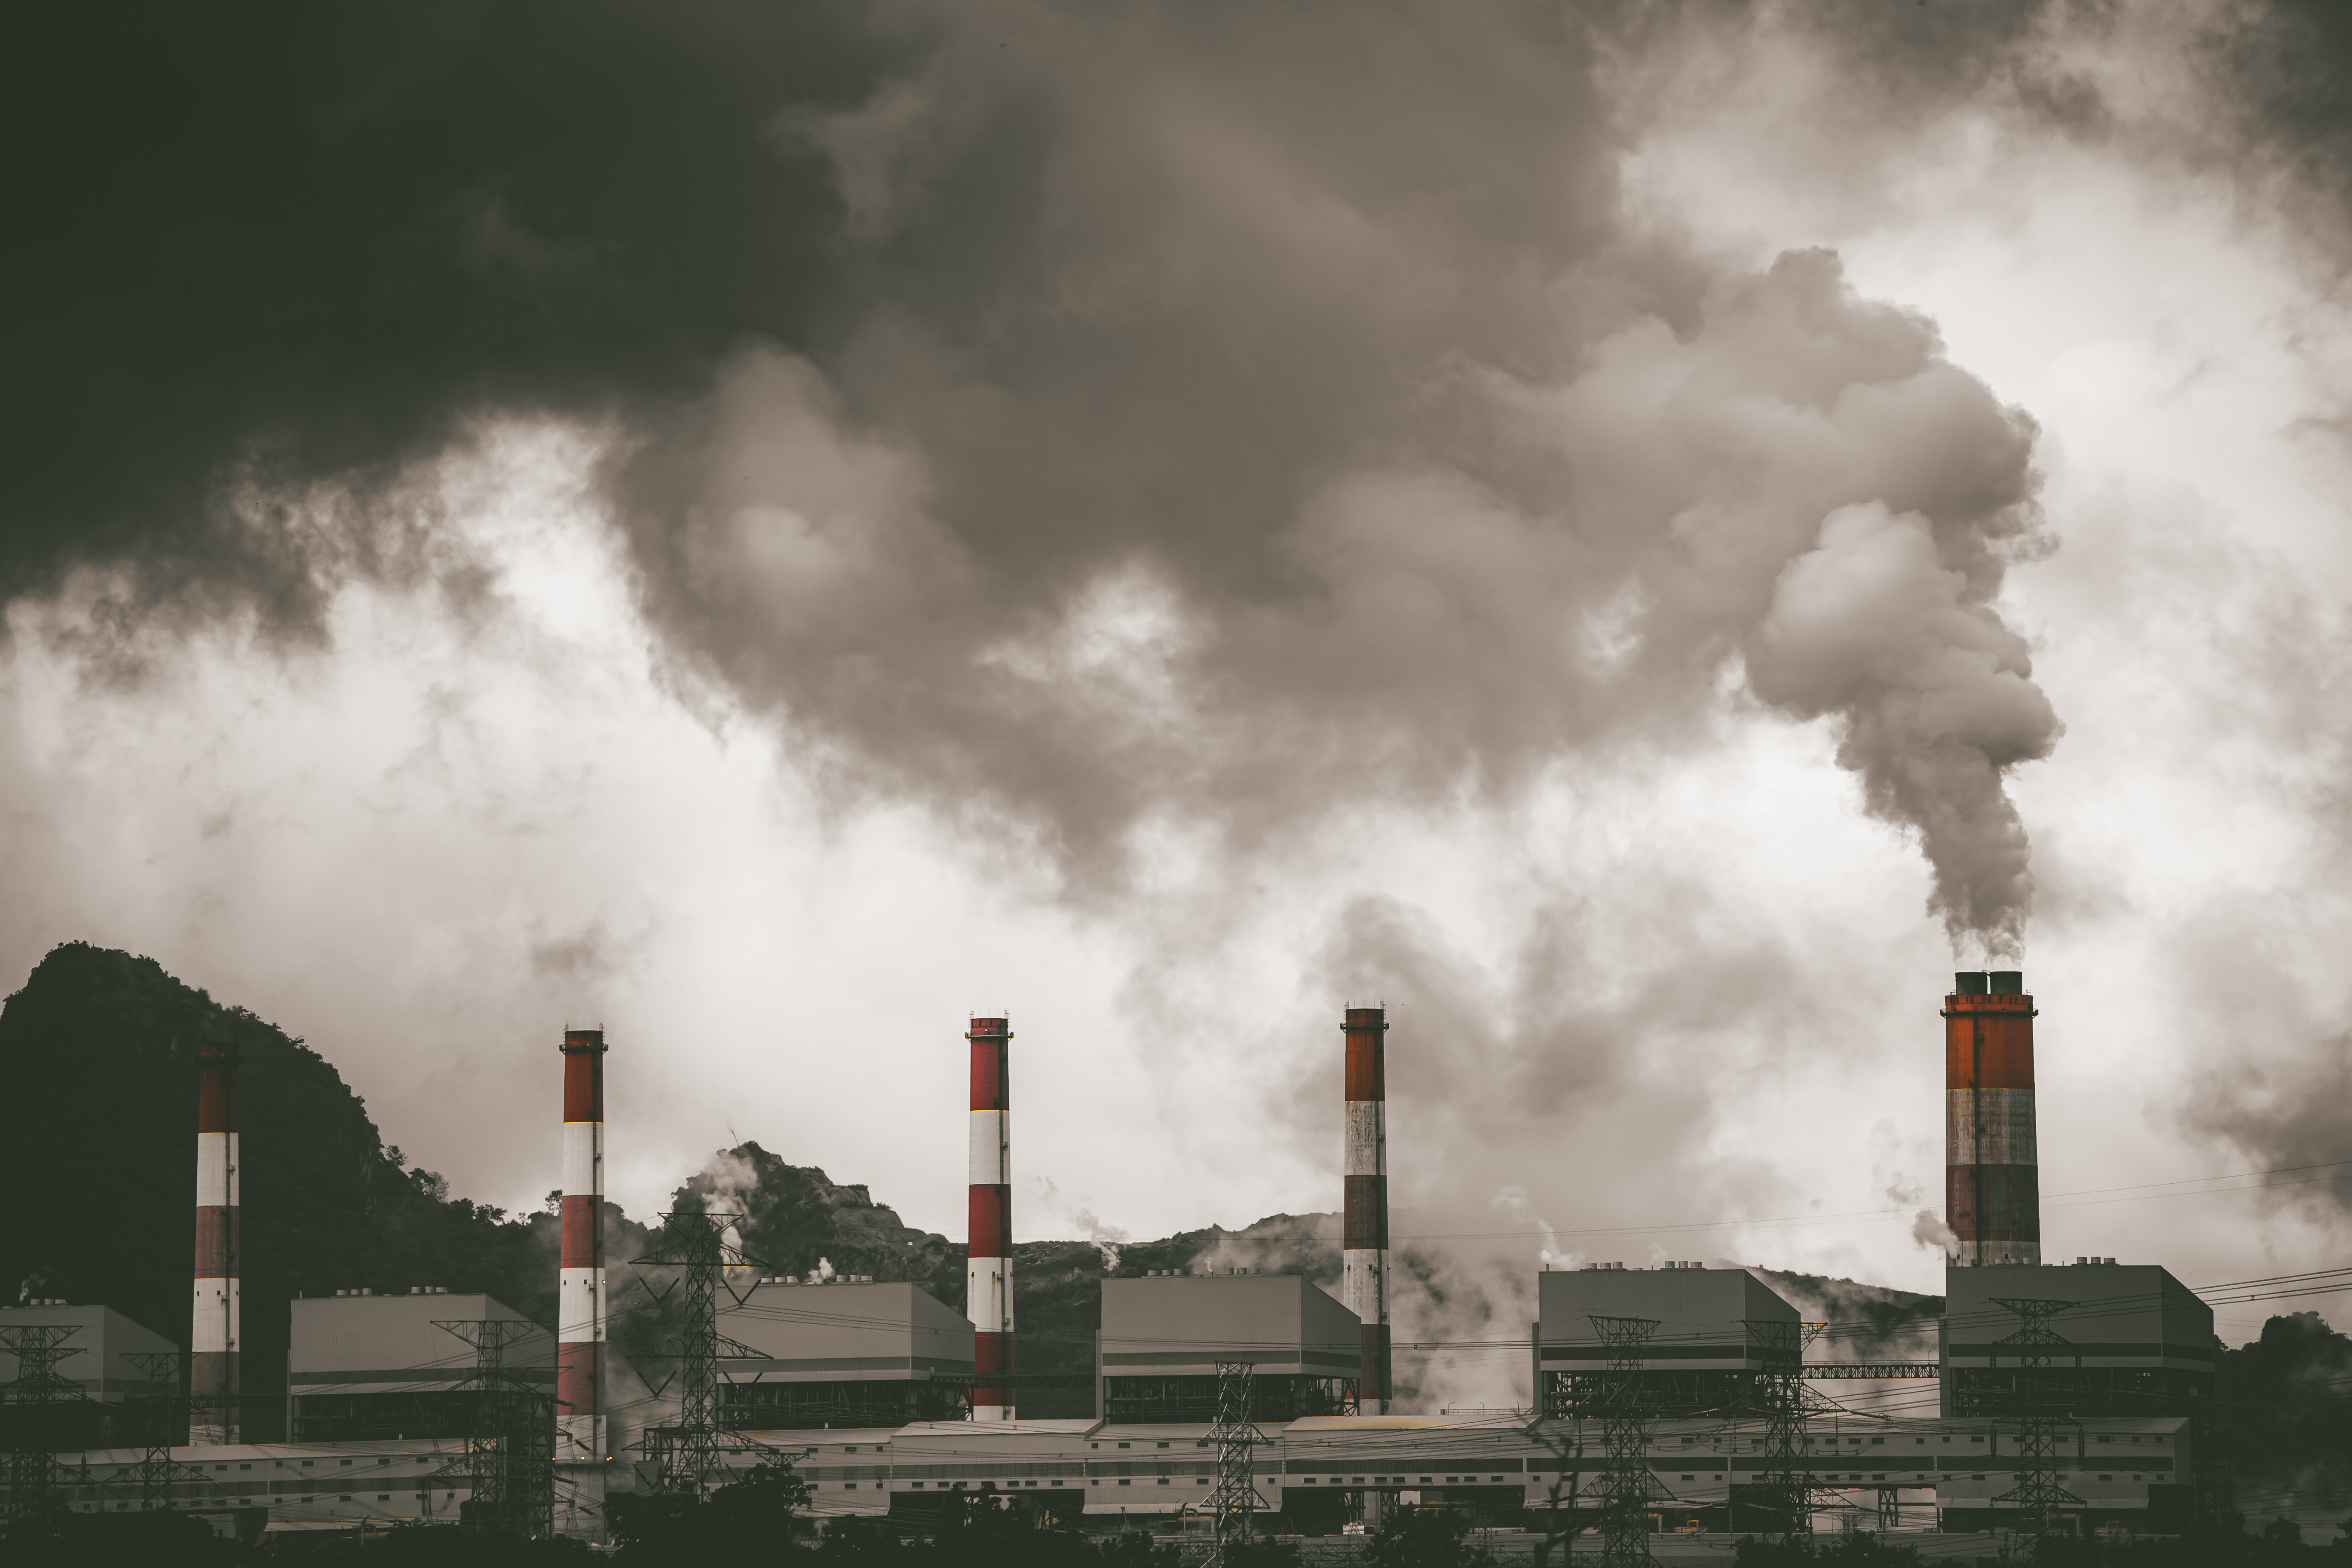 A sepia-toned image showing a factory with dark smoke billowing out of multiple smokestacks.